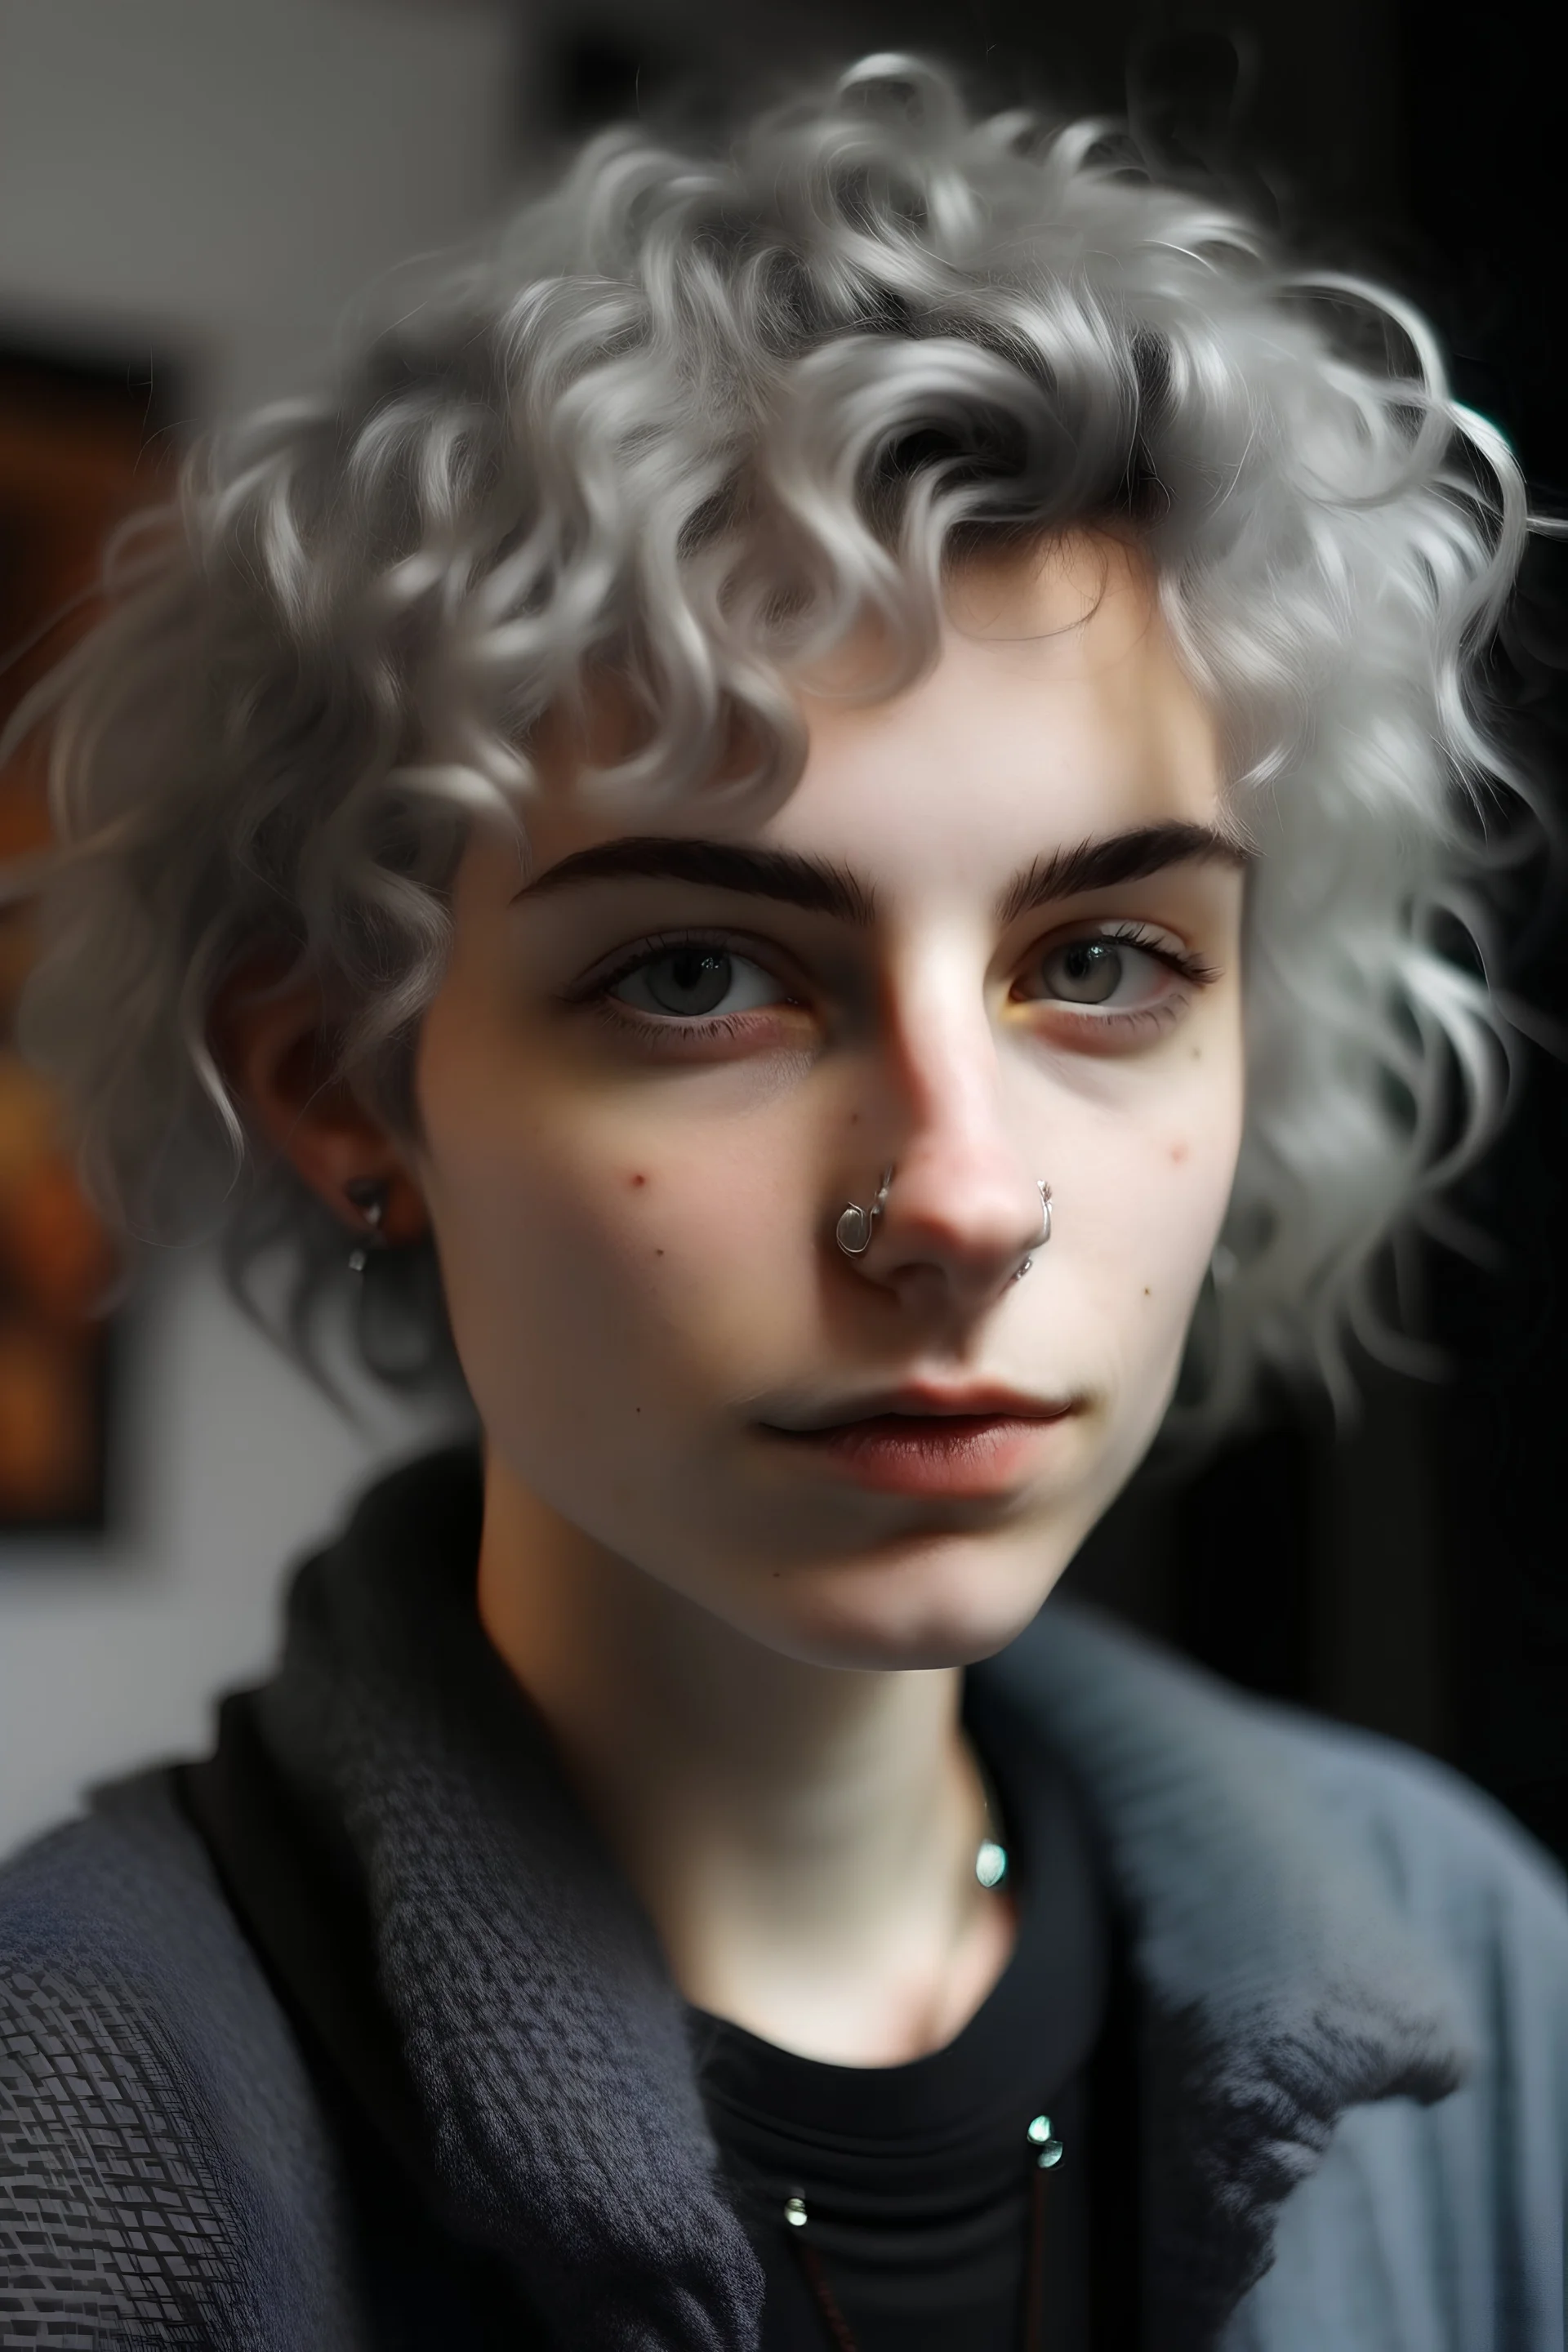 androgynous masc teen with fluffy curly short silver hair and piercings and freckles